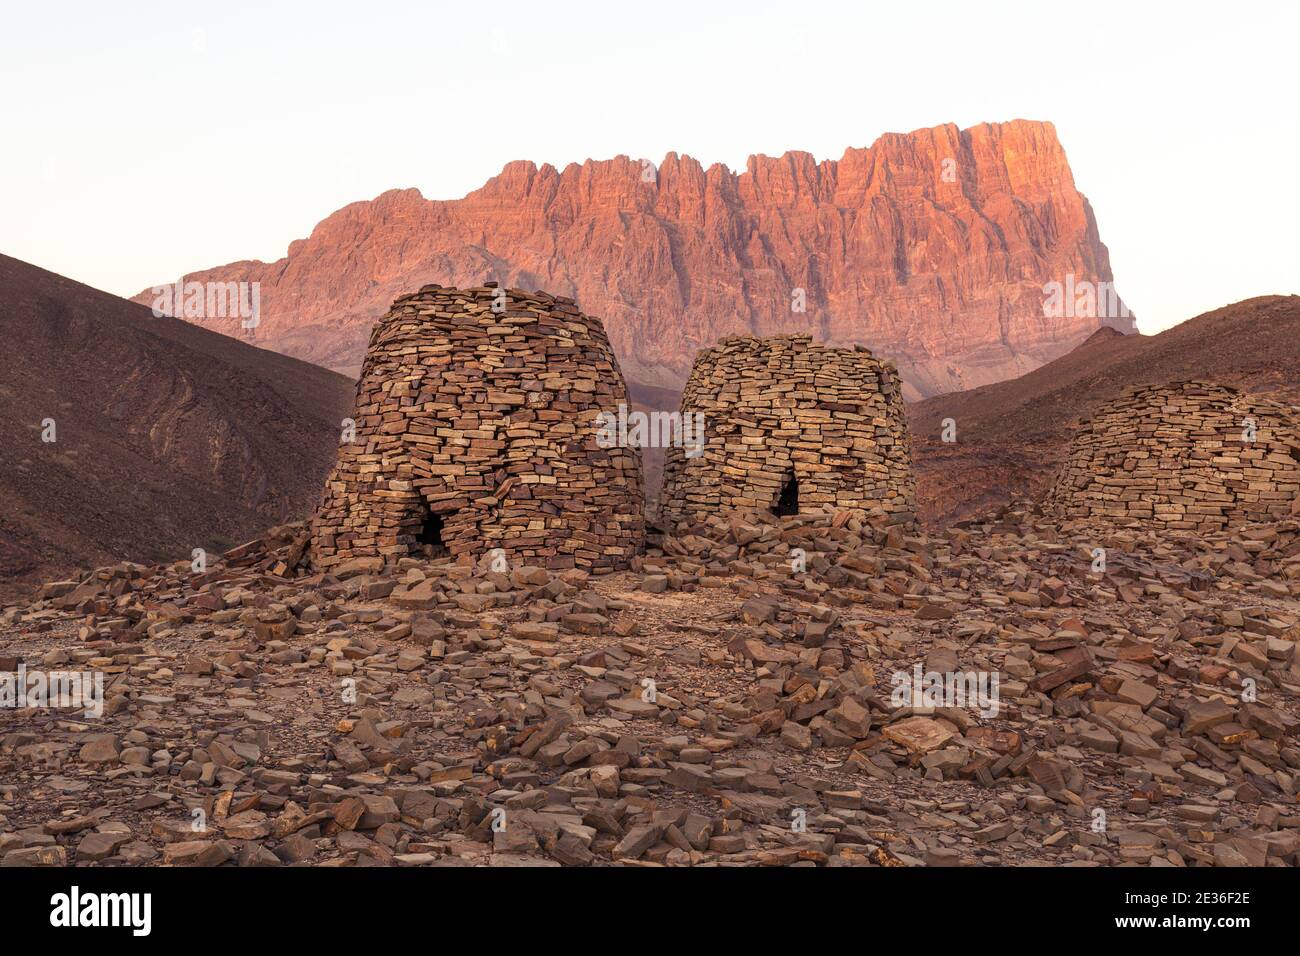 Burial mounds at Al Ayn with Jebel Misht in the background; Oman Stock Photo